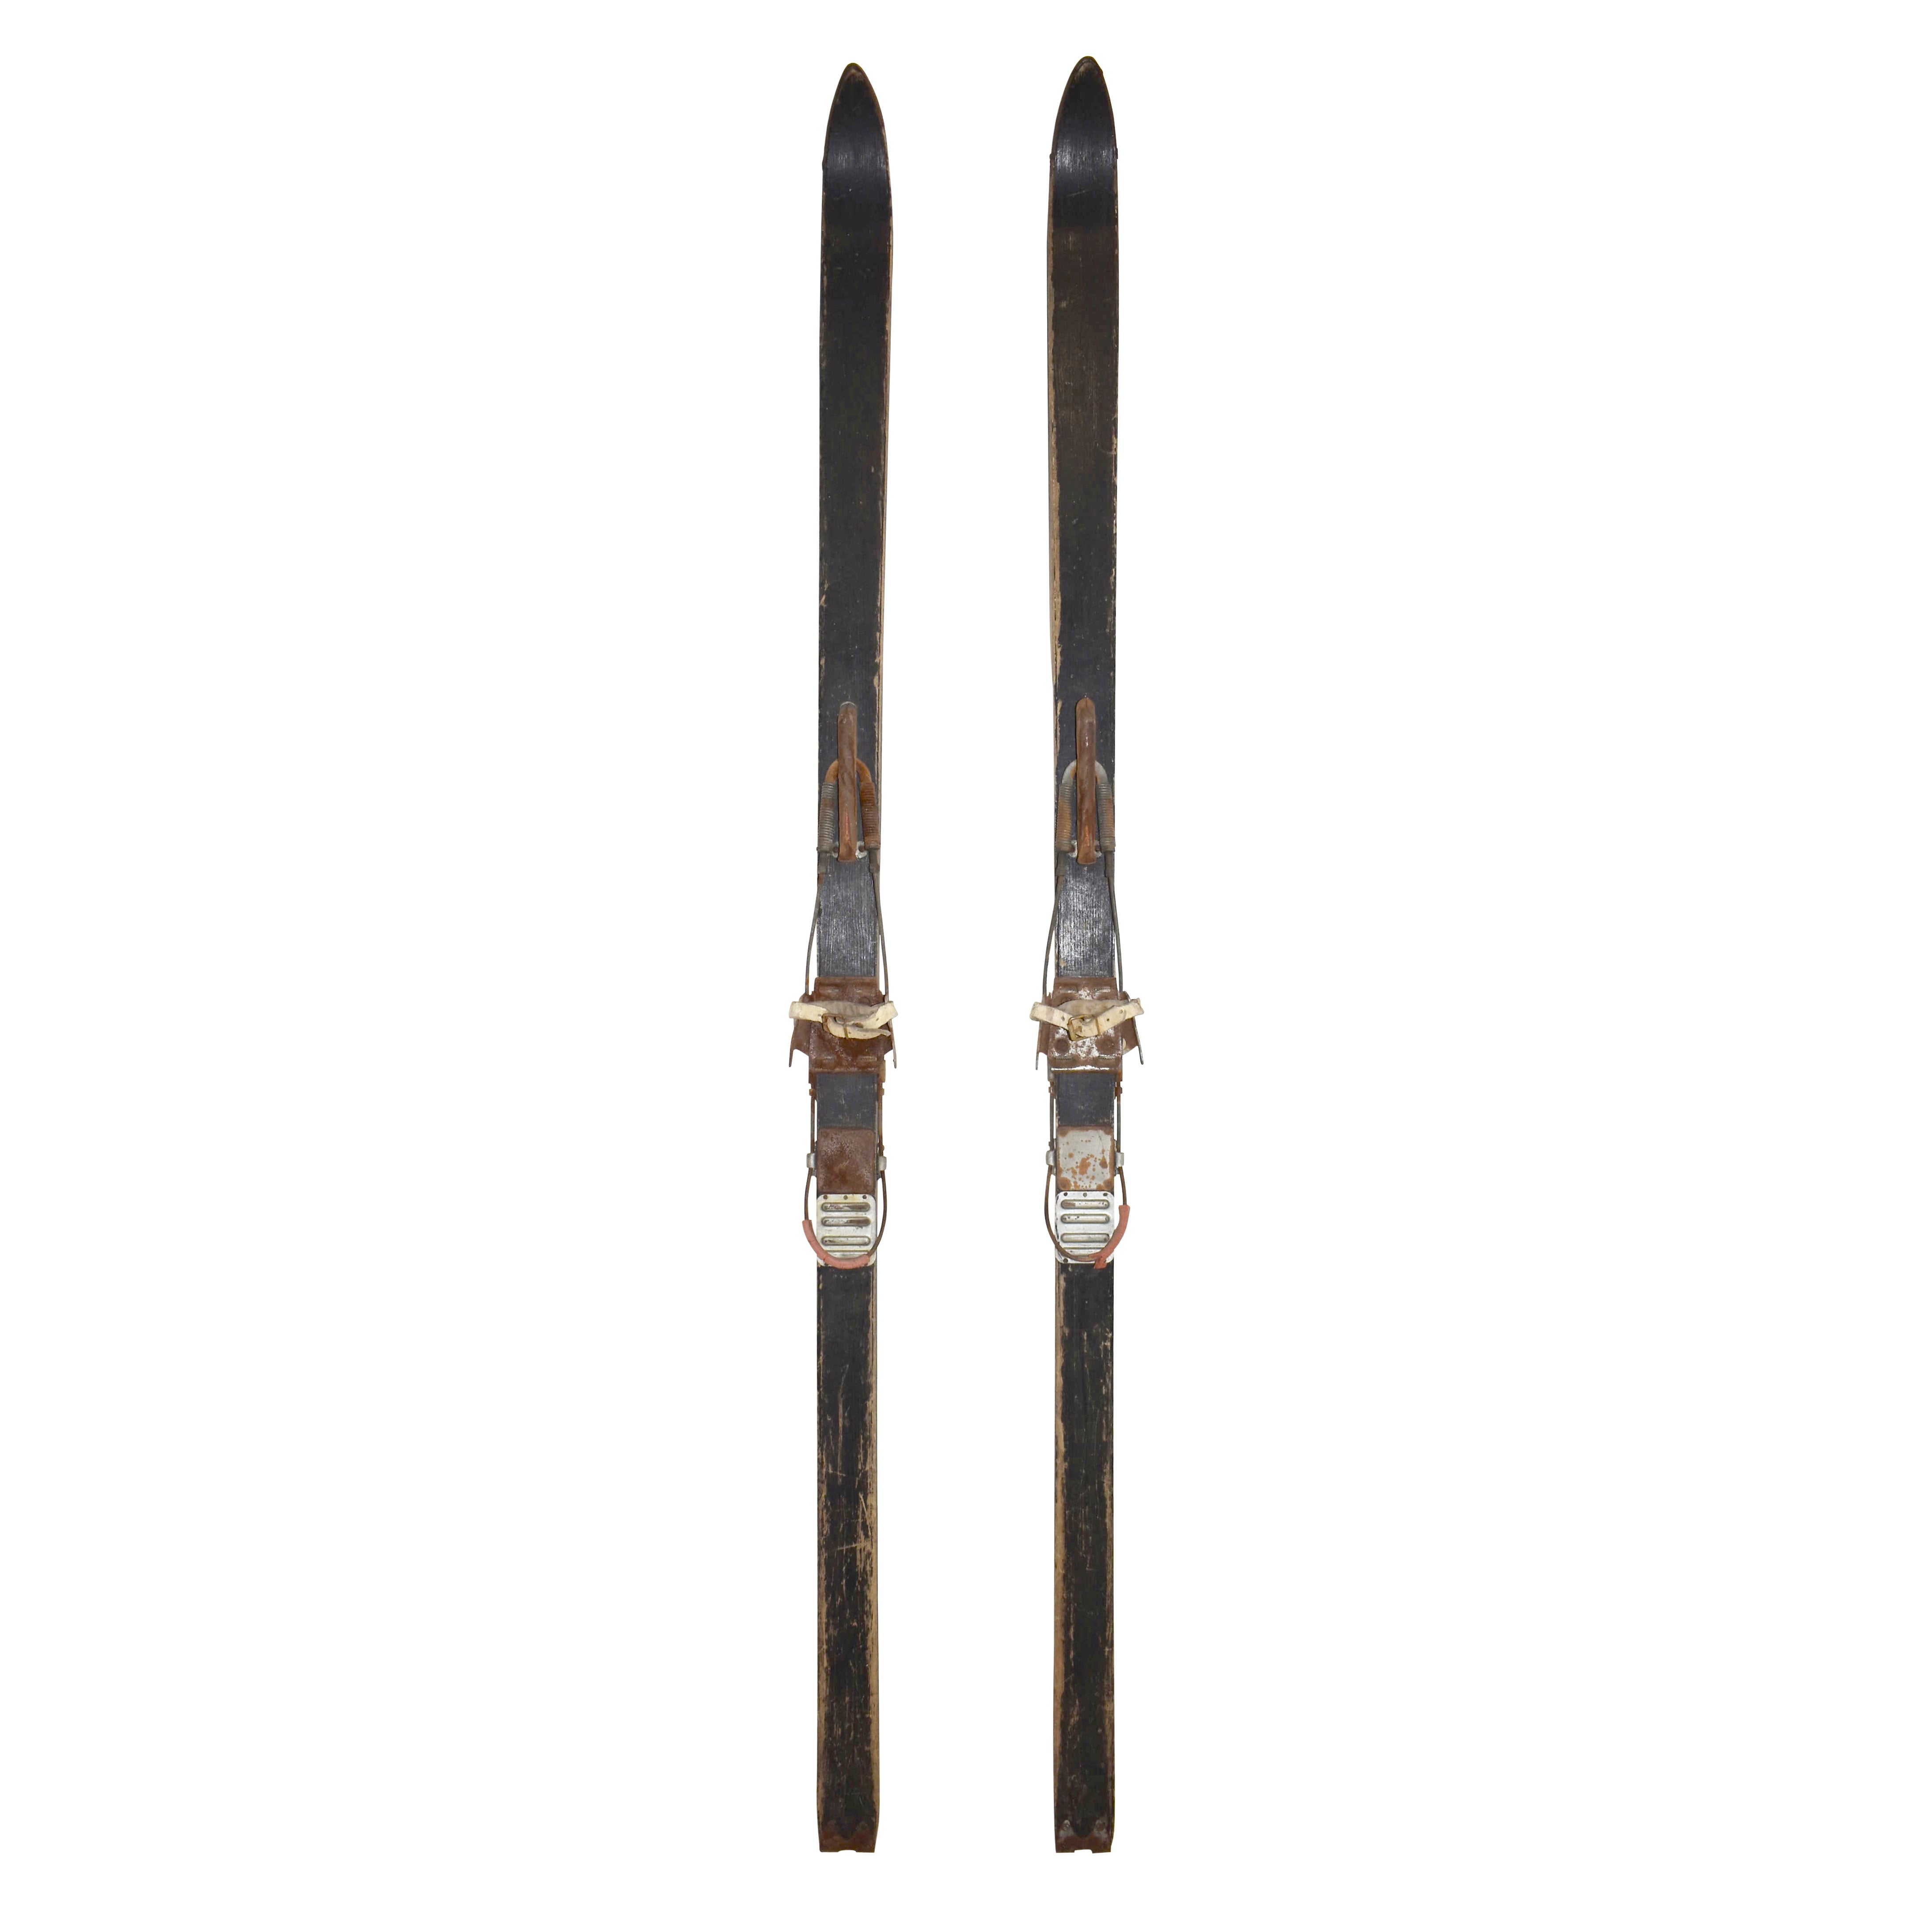 Black Wooden Skis with Cable Bindings